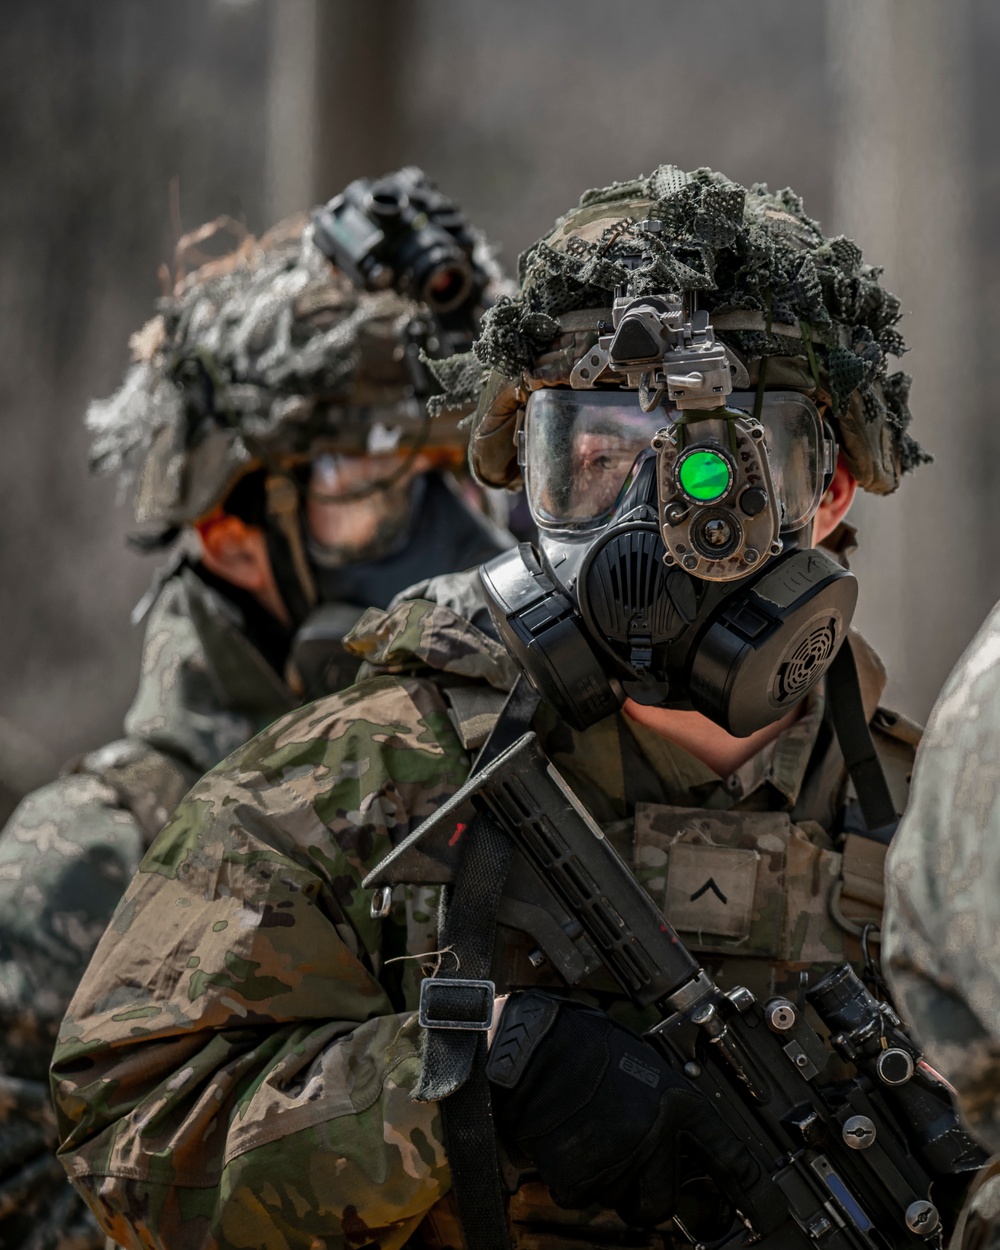 4-23 Infantry Conduct STX During Exercise Warrior Shield